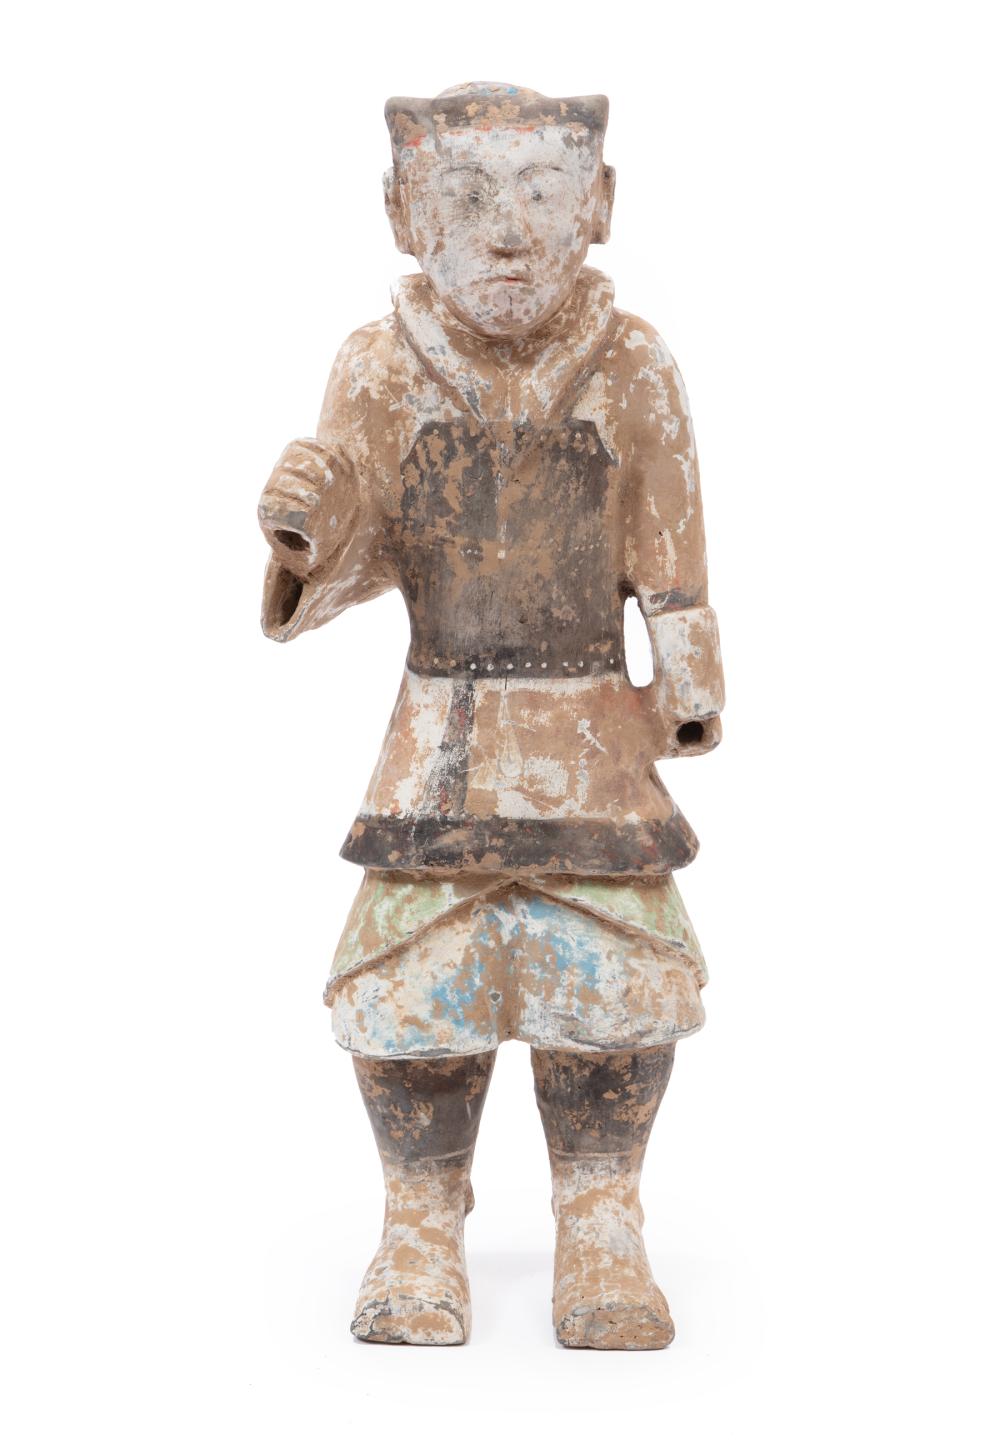 CHINESE PAINTED POTTERY FIGURE 2e3339